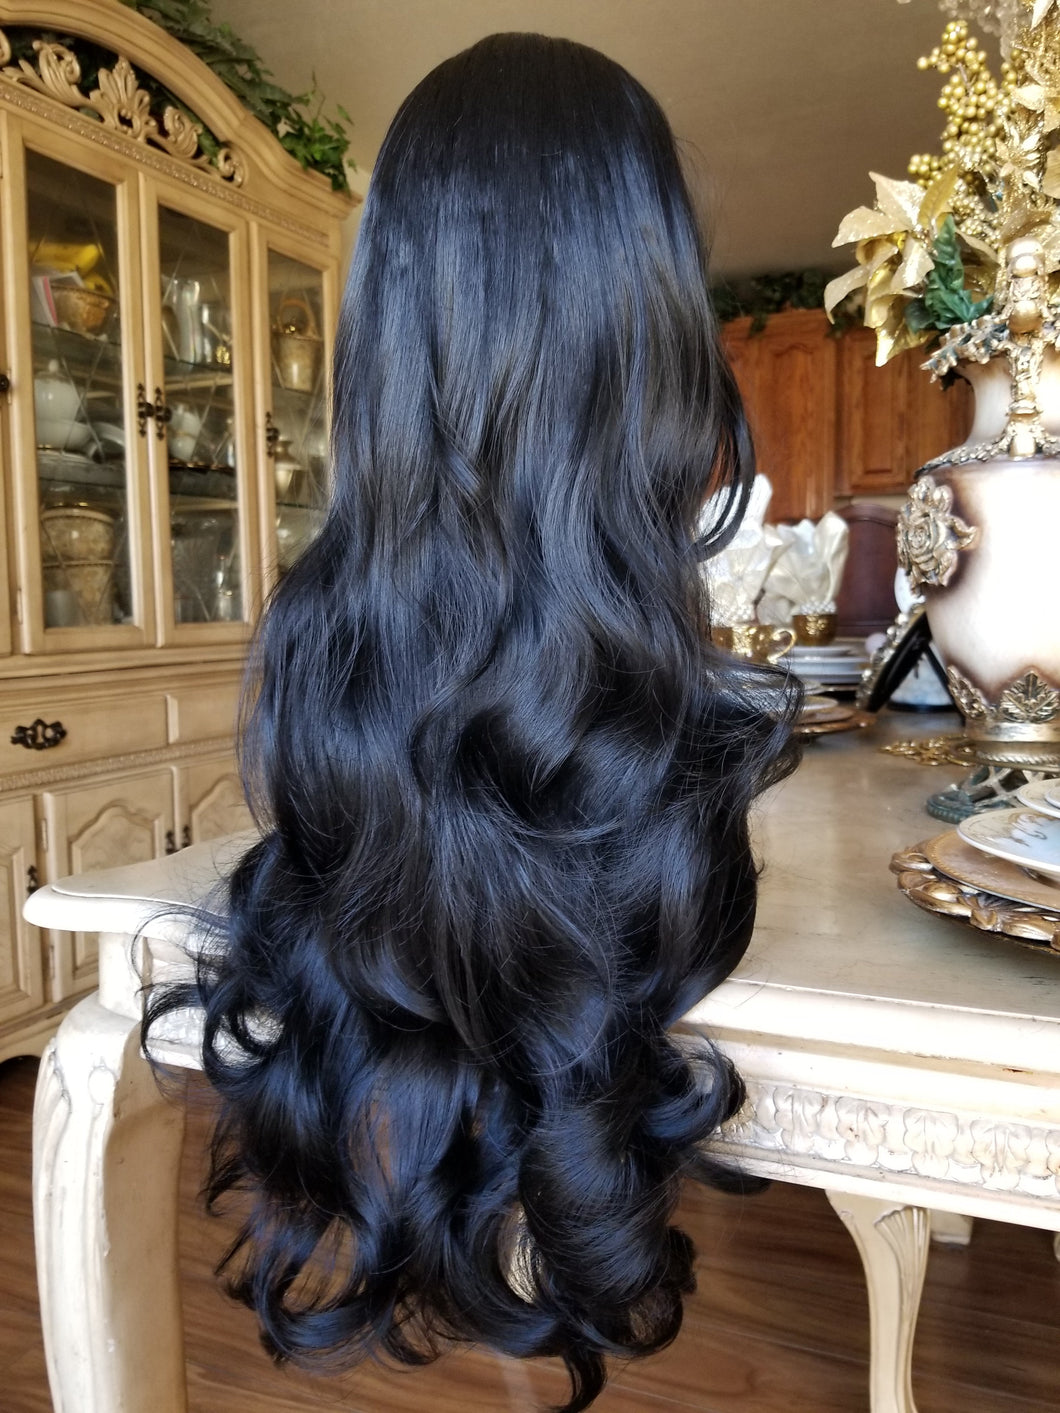 Bodywave Beauty Lace Front Wig 26-28 inches!! - Goddess Beauty Royal Wigs